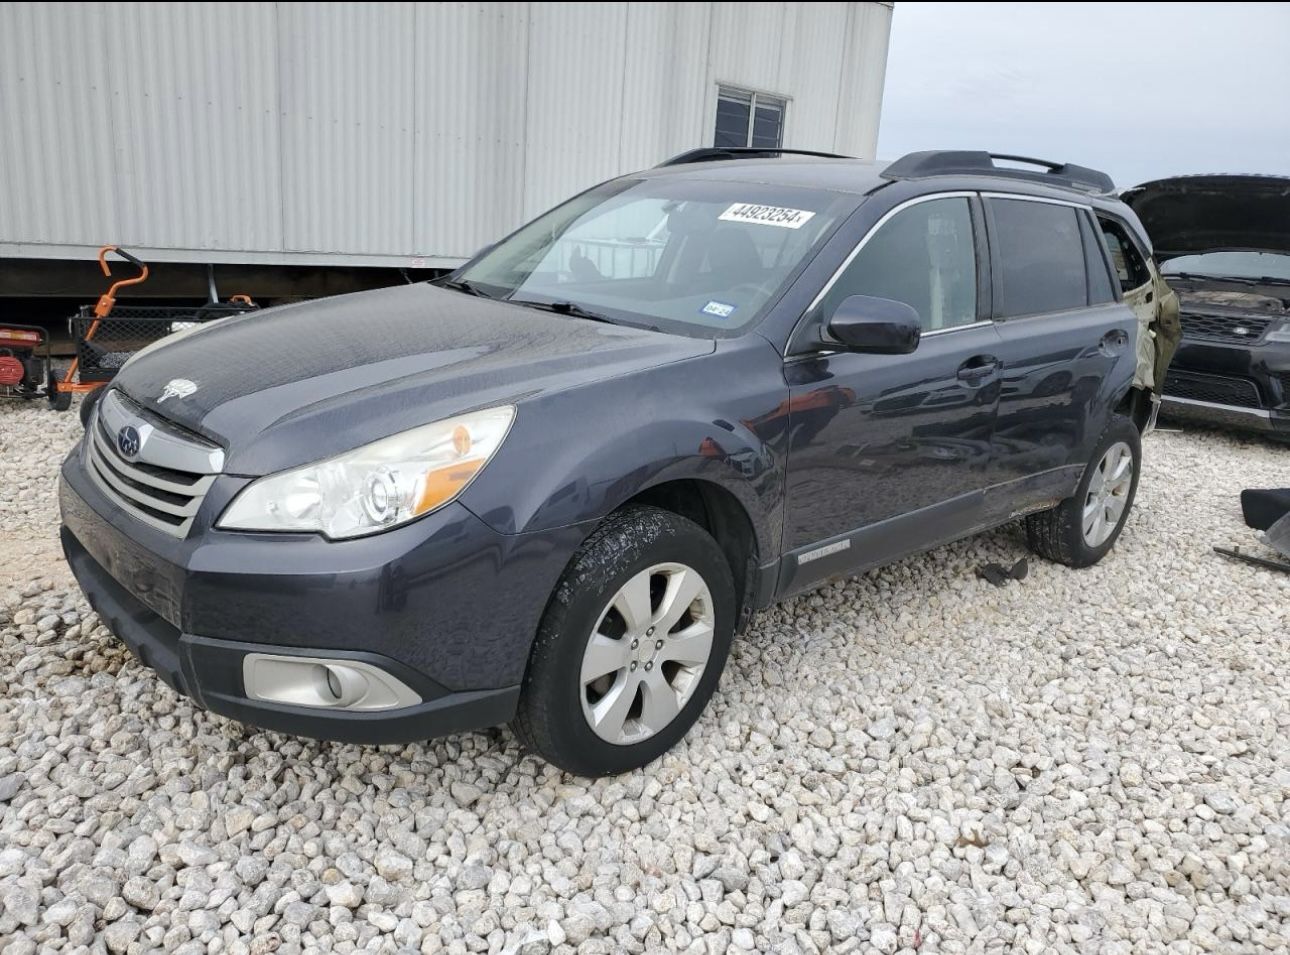 PARTS ONLY-PARTING OUT 2012 SUBARU OUTBACK 2.5